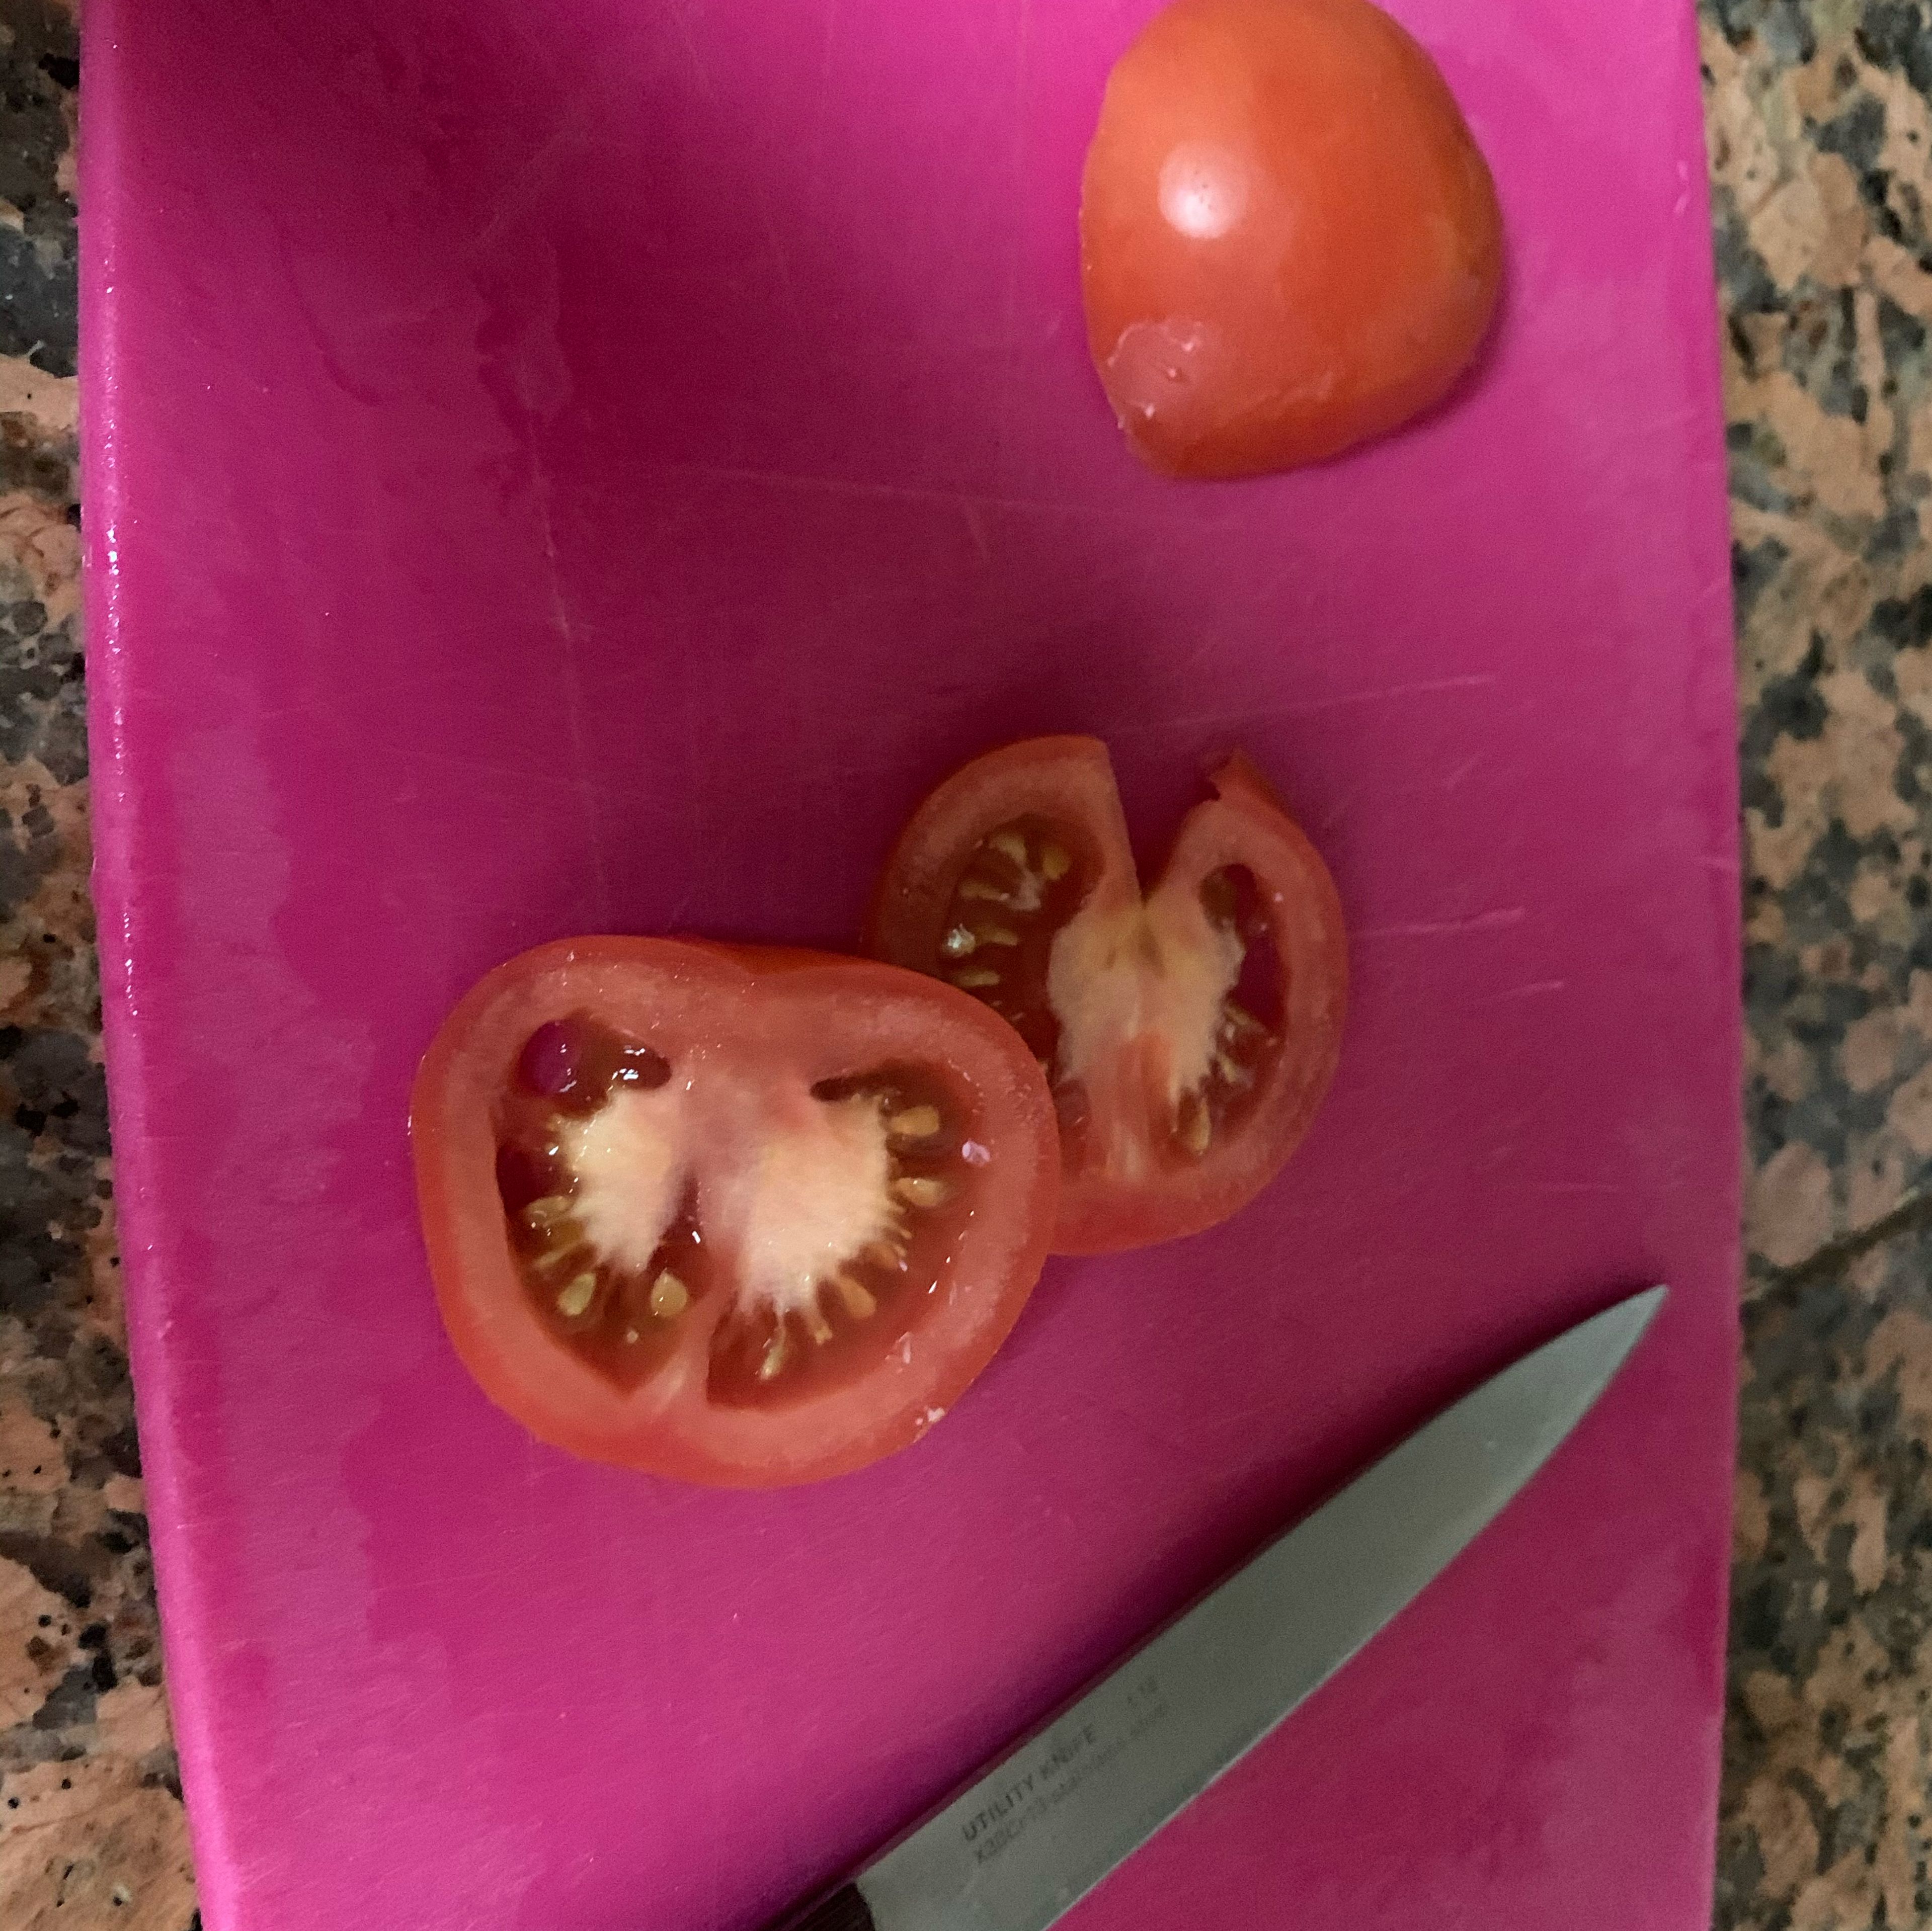 Have two slices from the tomato